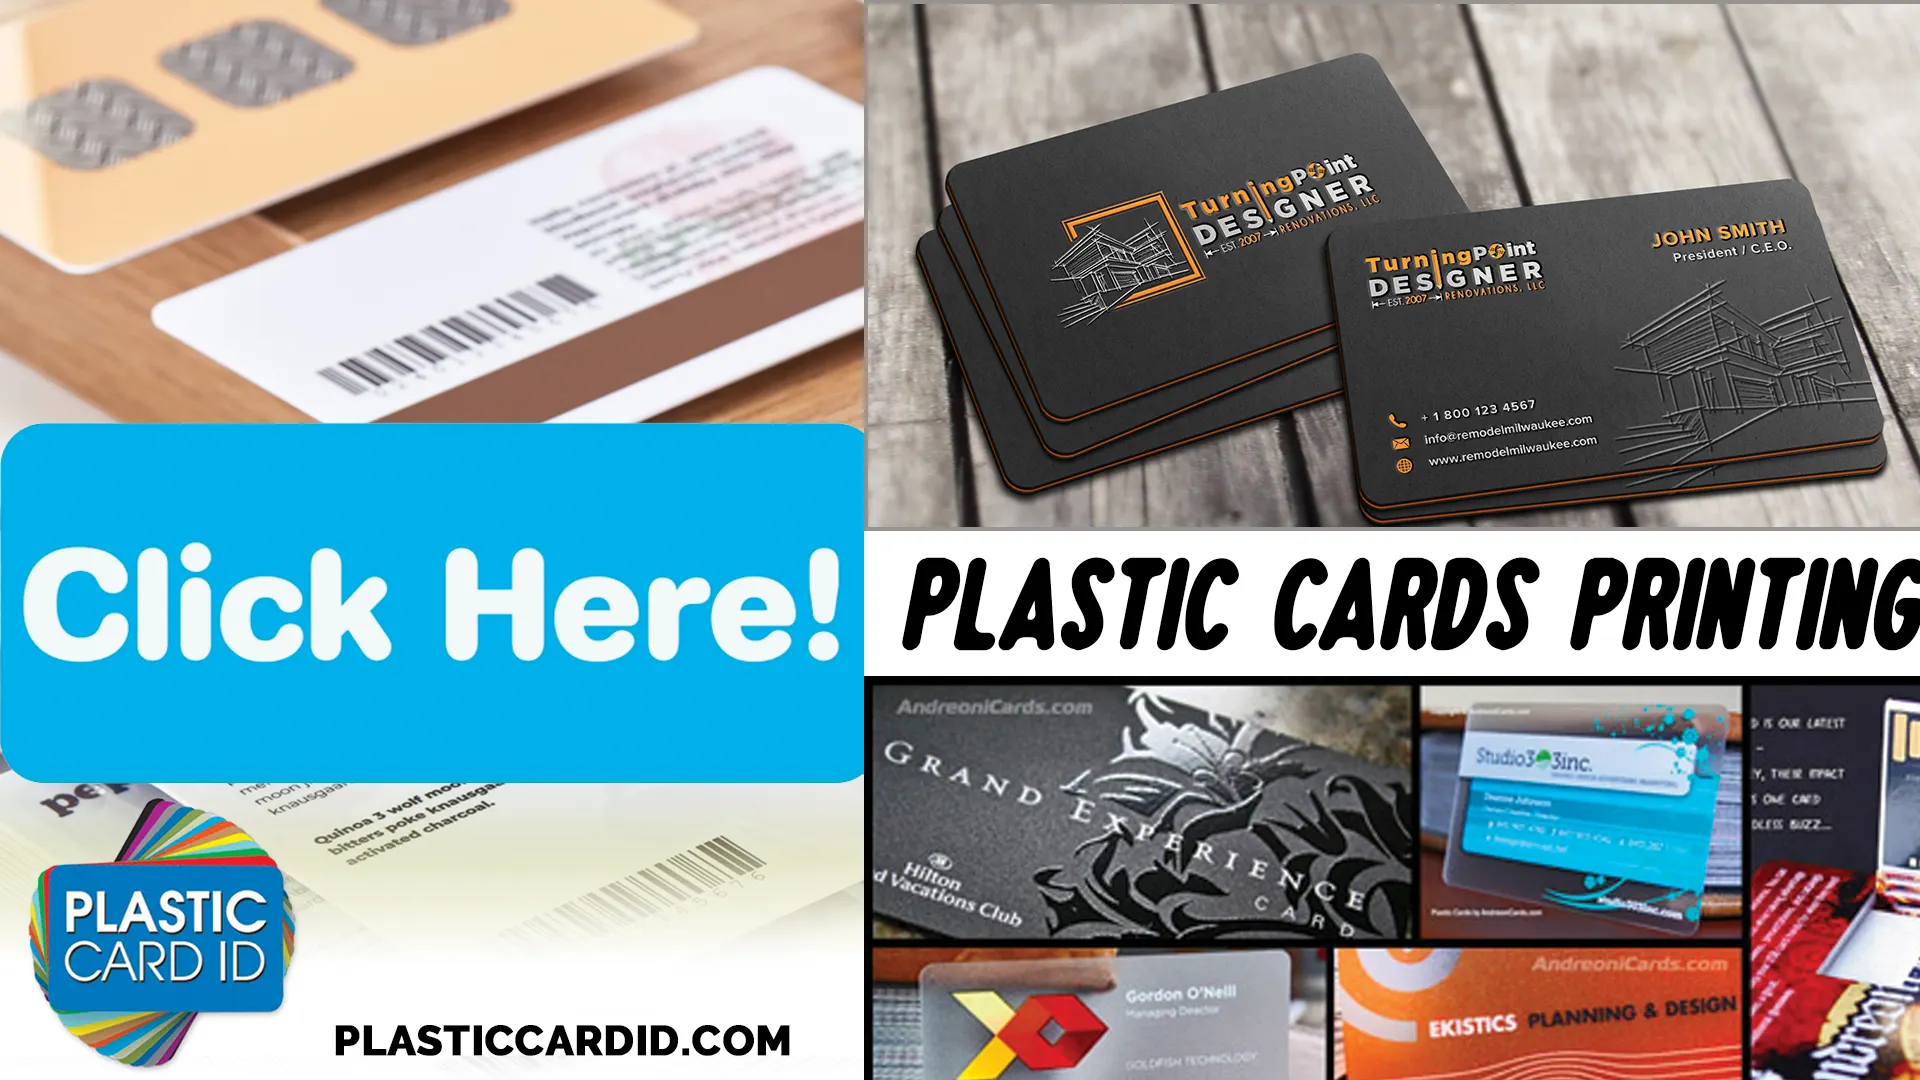 Capture the Essence of Your Business with Plastic Card ID
's Design Prowess